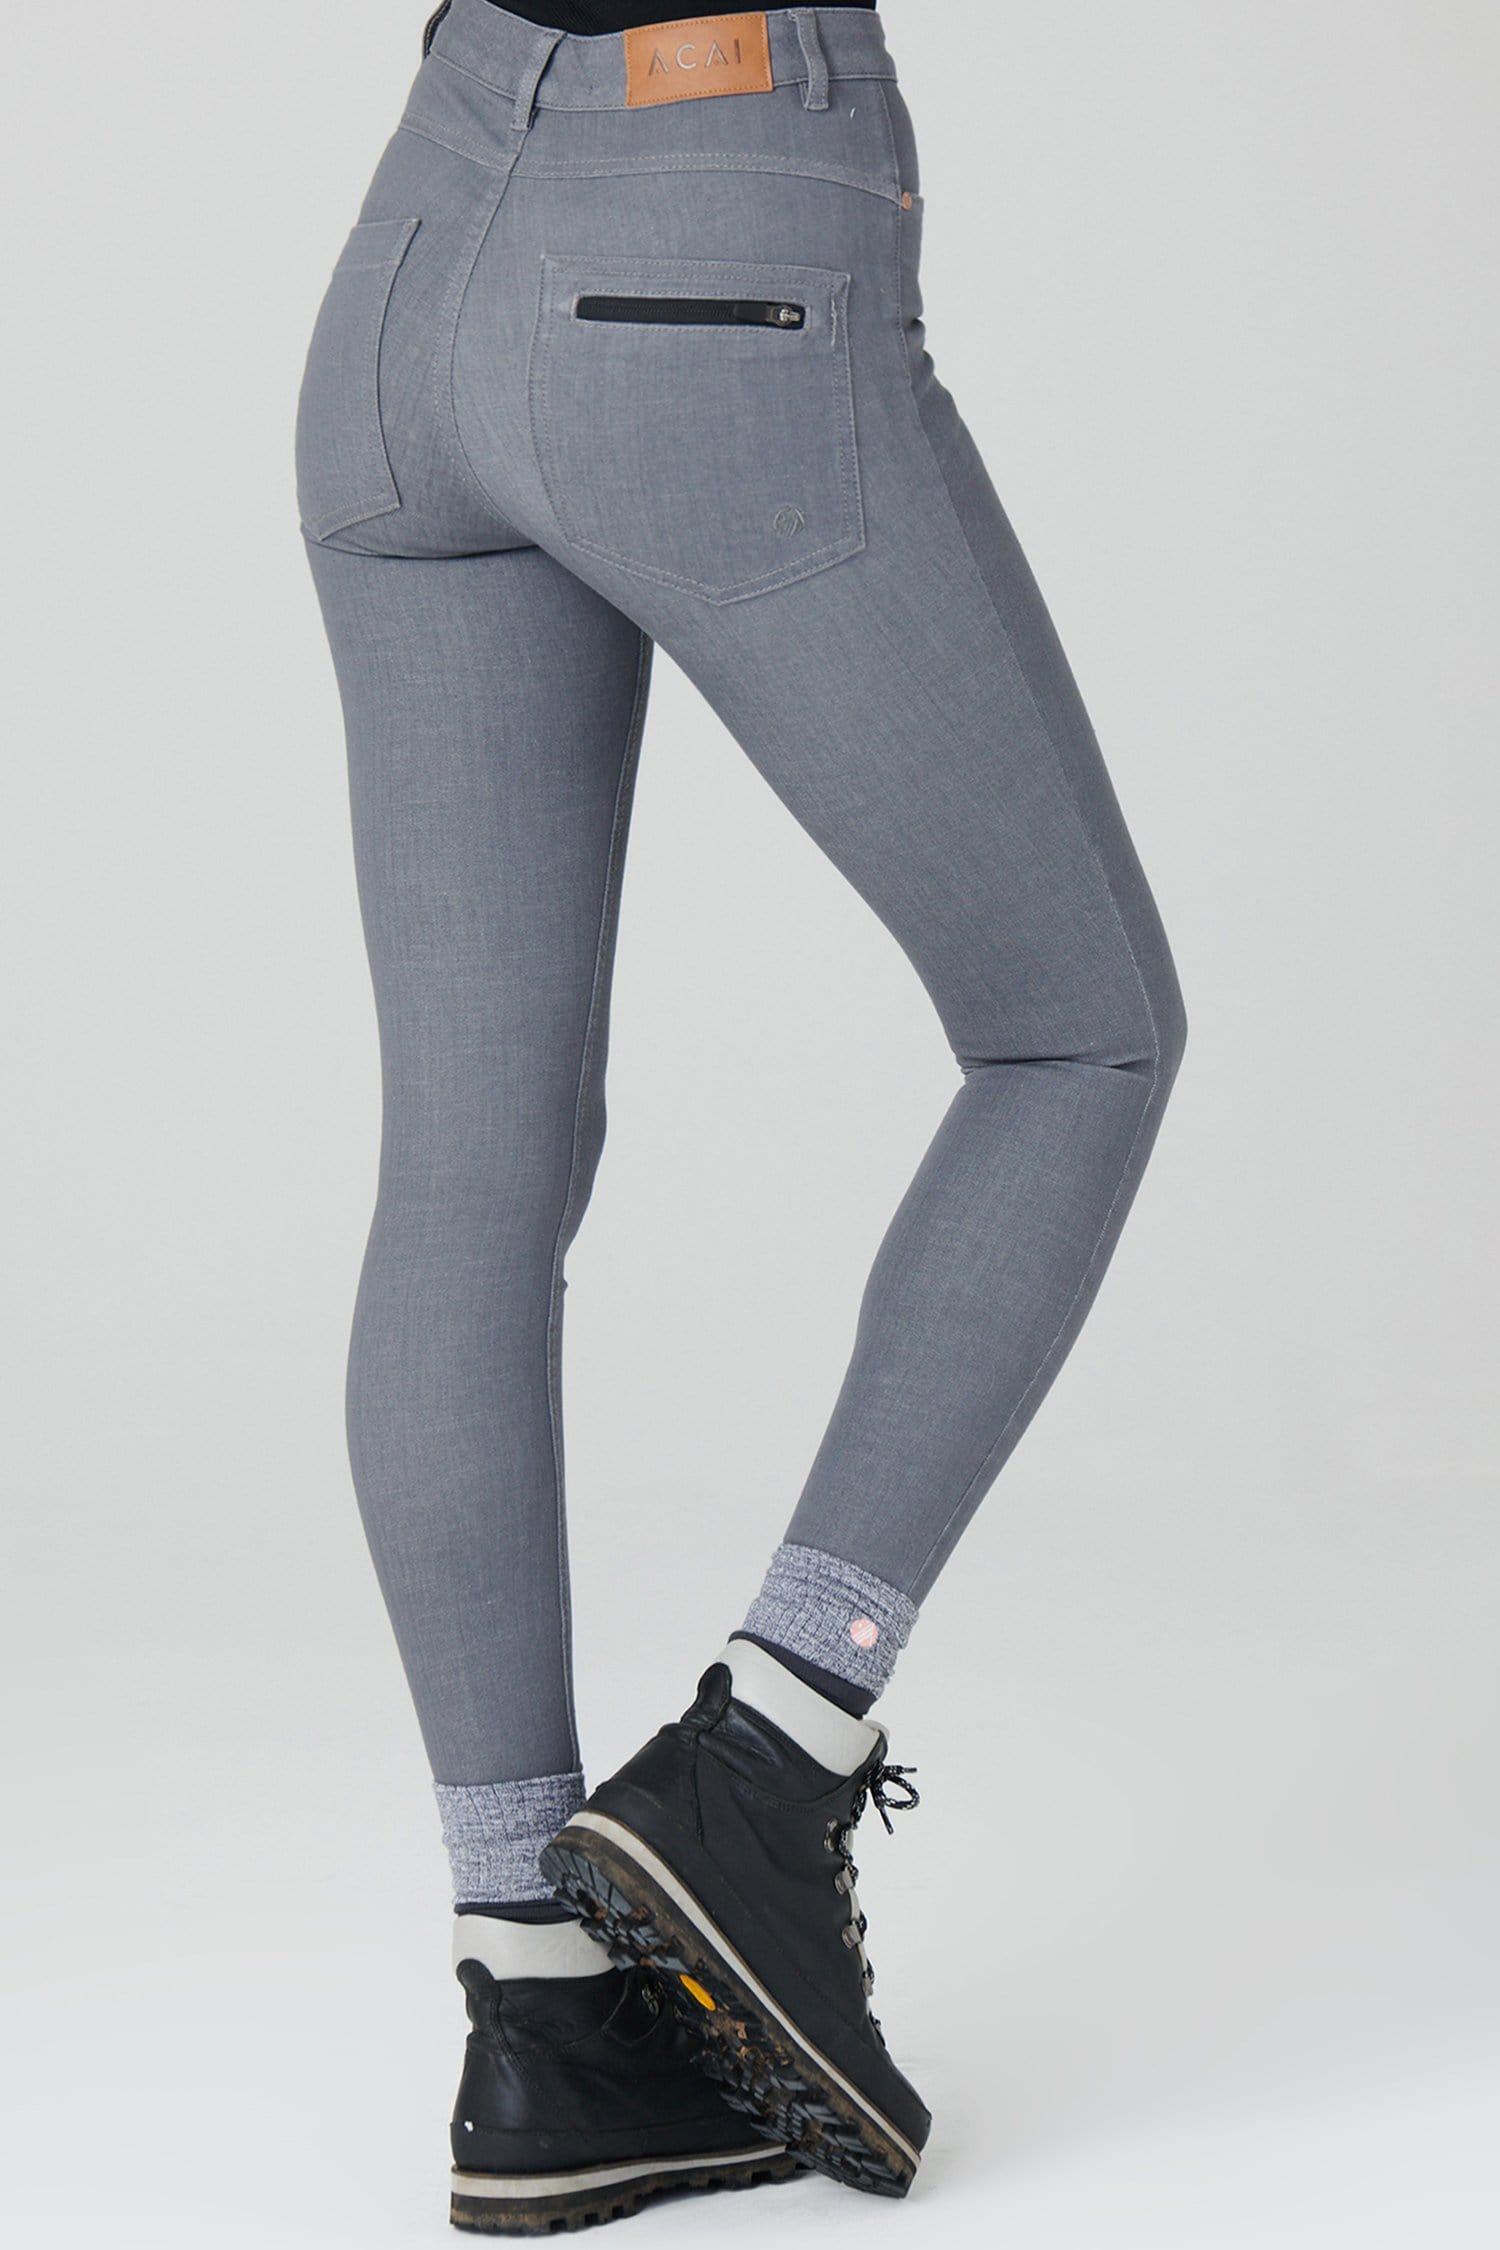 The Skinny Outdoor Jeans - Grey Denim Trousers  